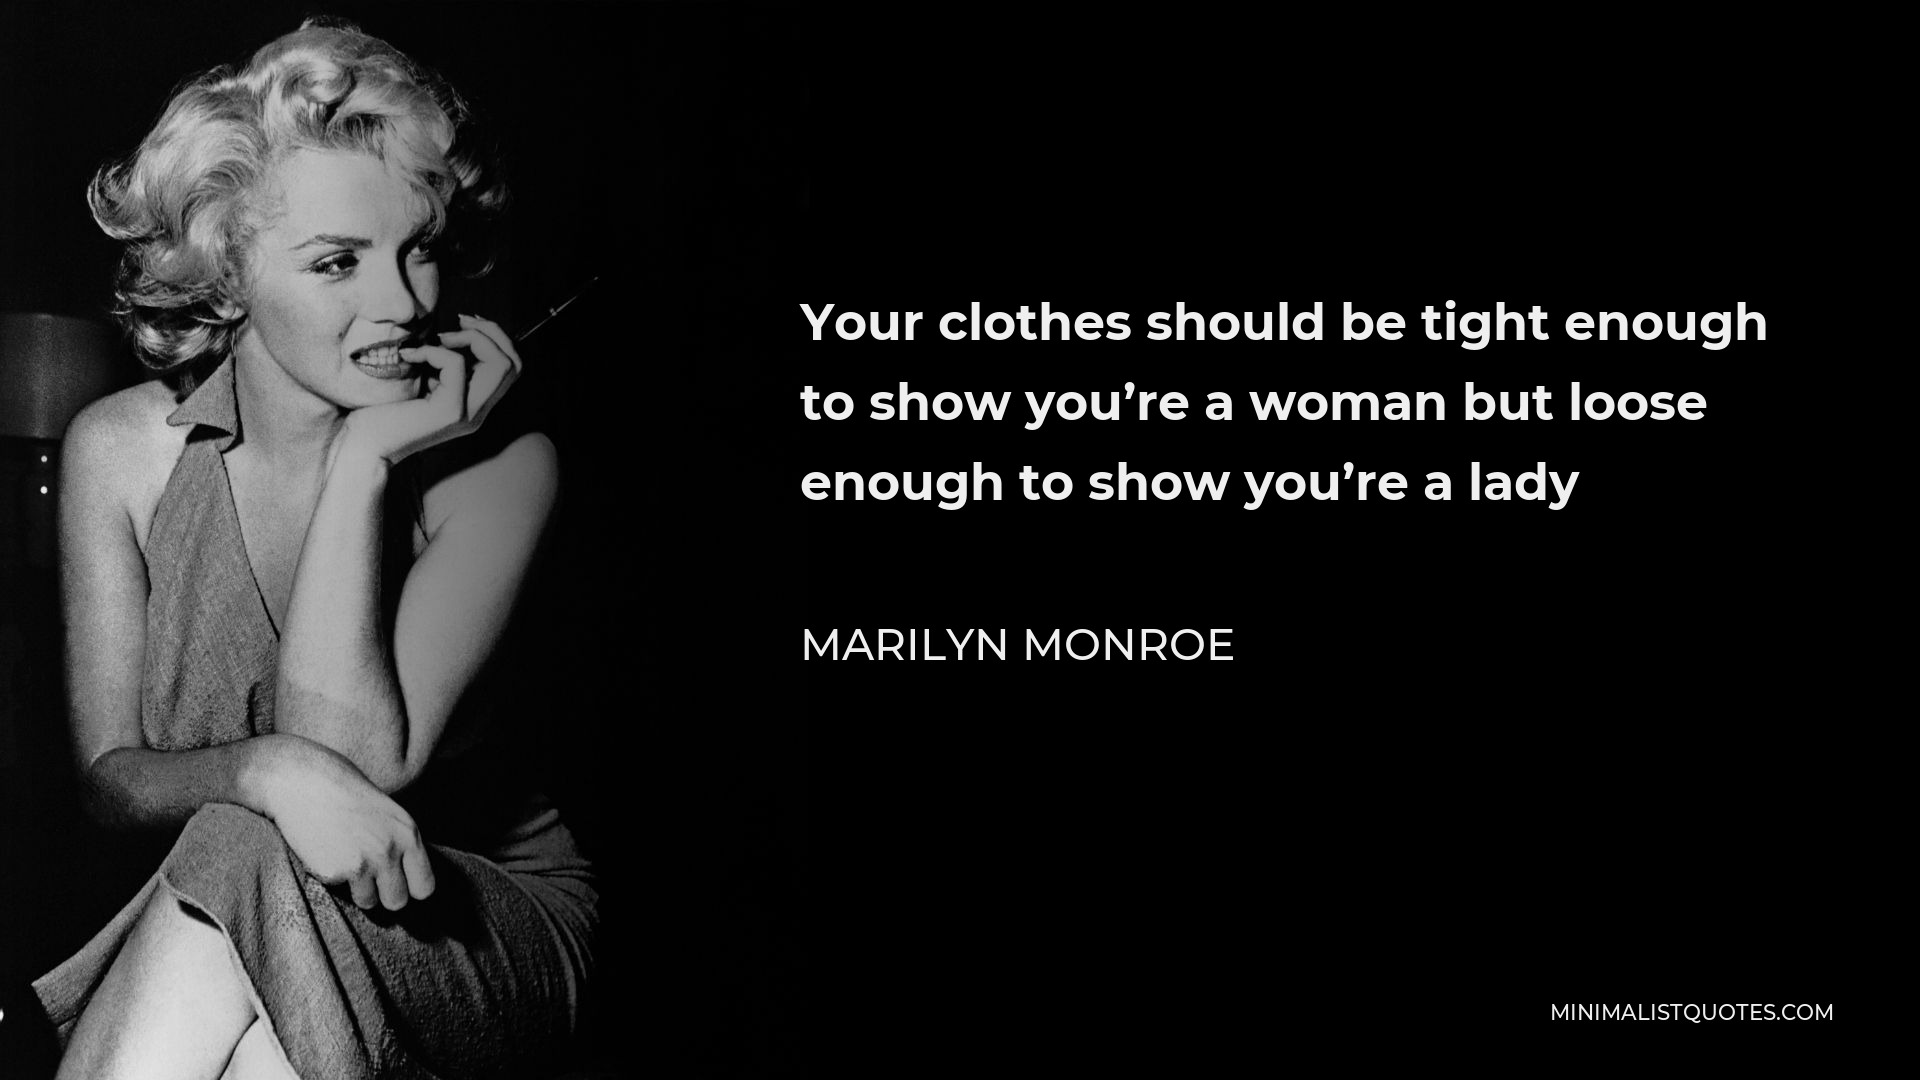 Marilyn Monroe Quote - Your clothes should be tight enough to show you’re a woman but loose enough to show you’re a lady